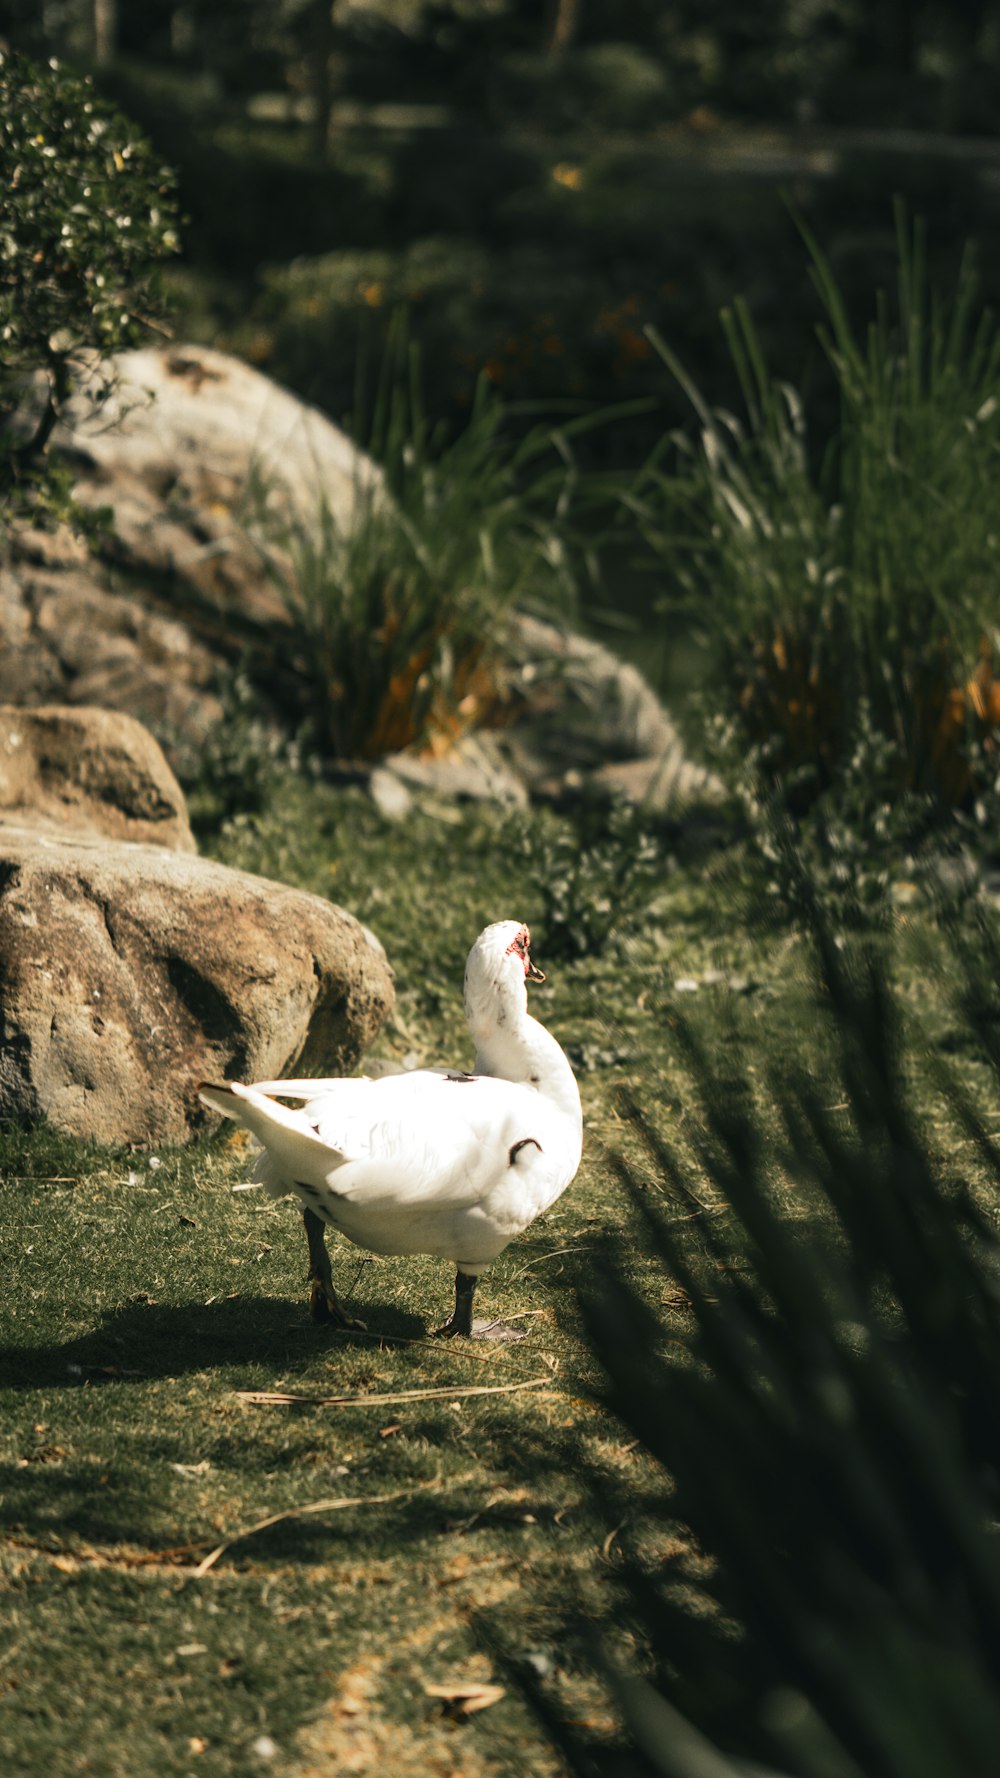 a white duck standing on top of a lush green field